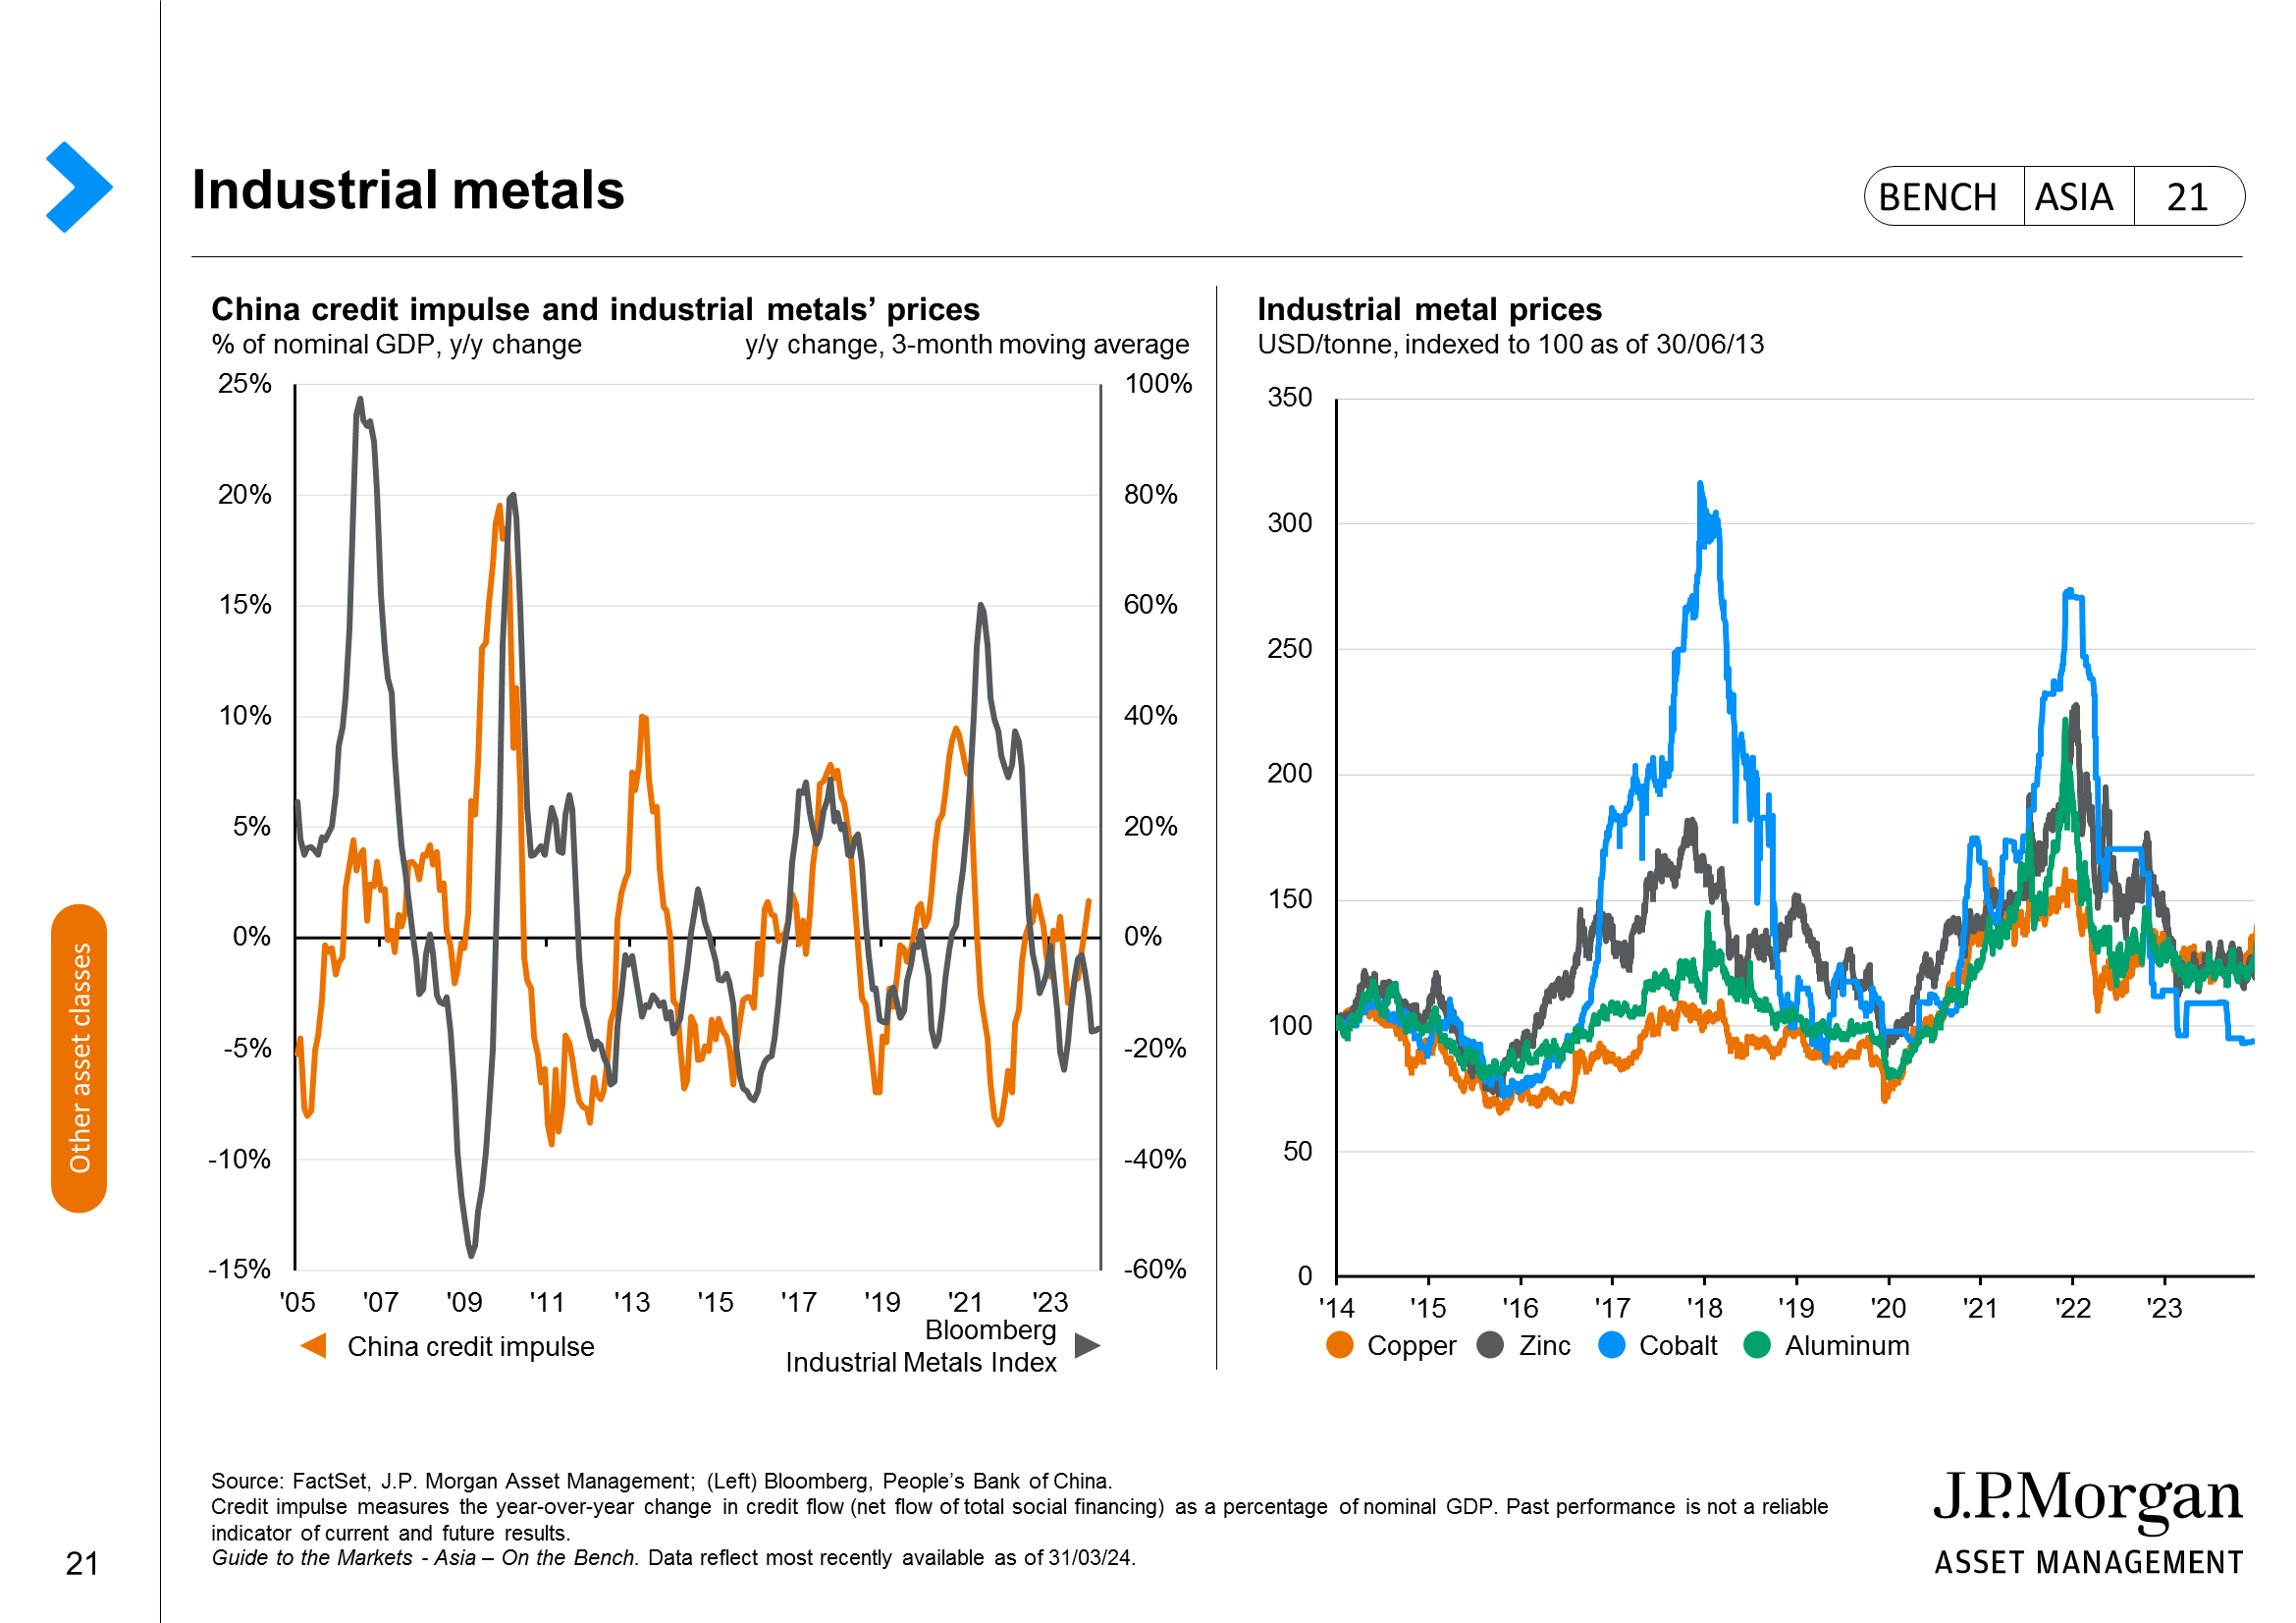 United States: Interest rates and equities